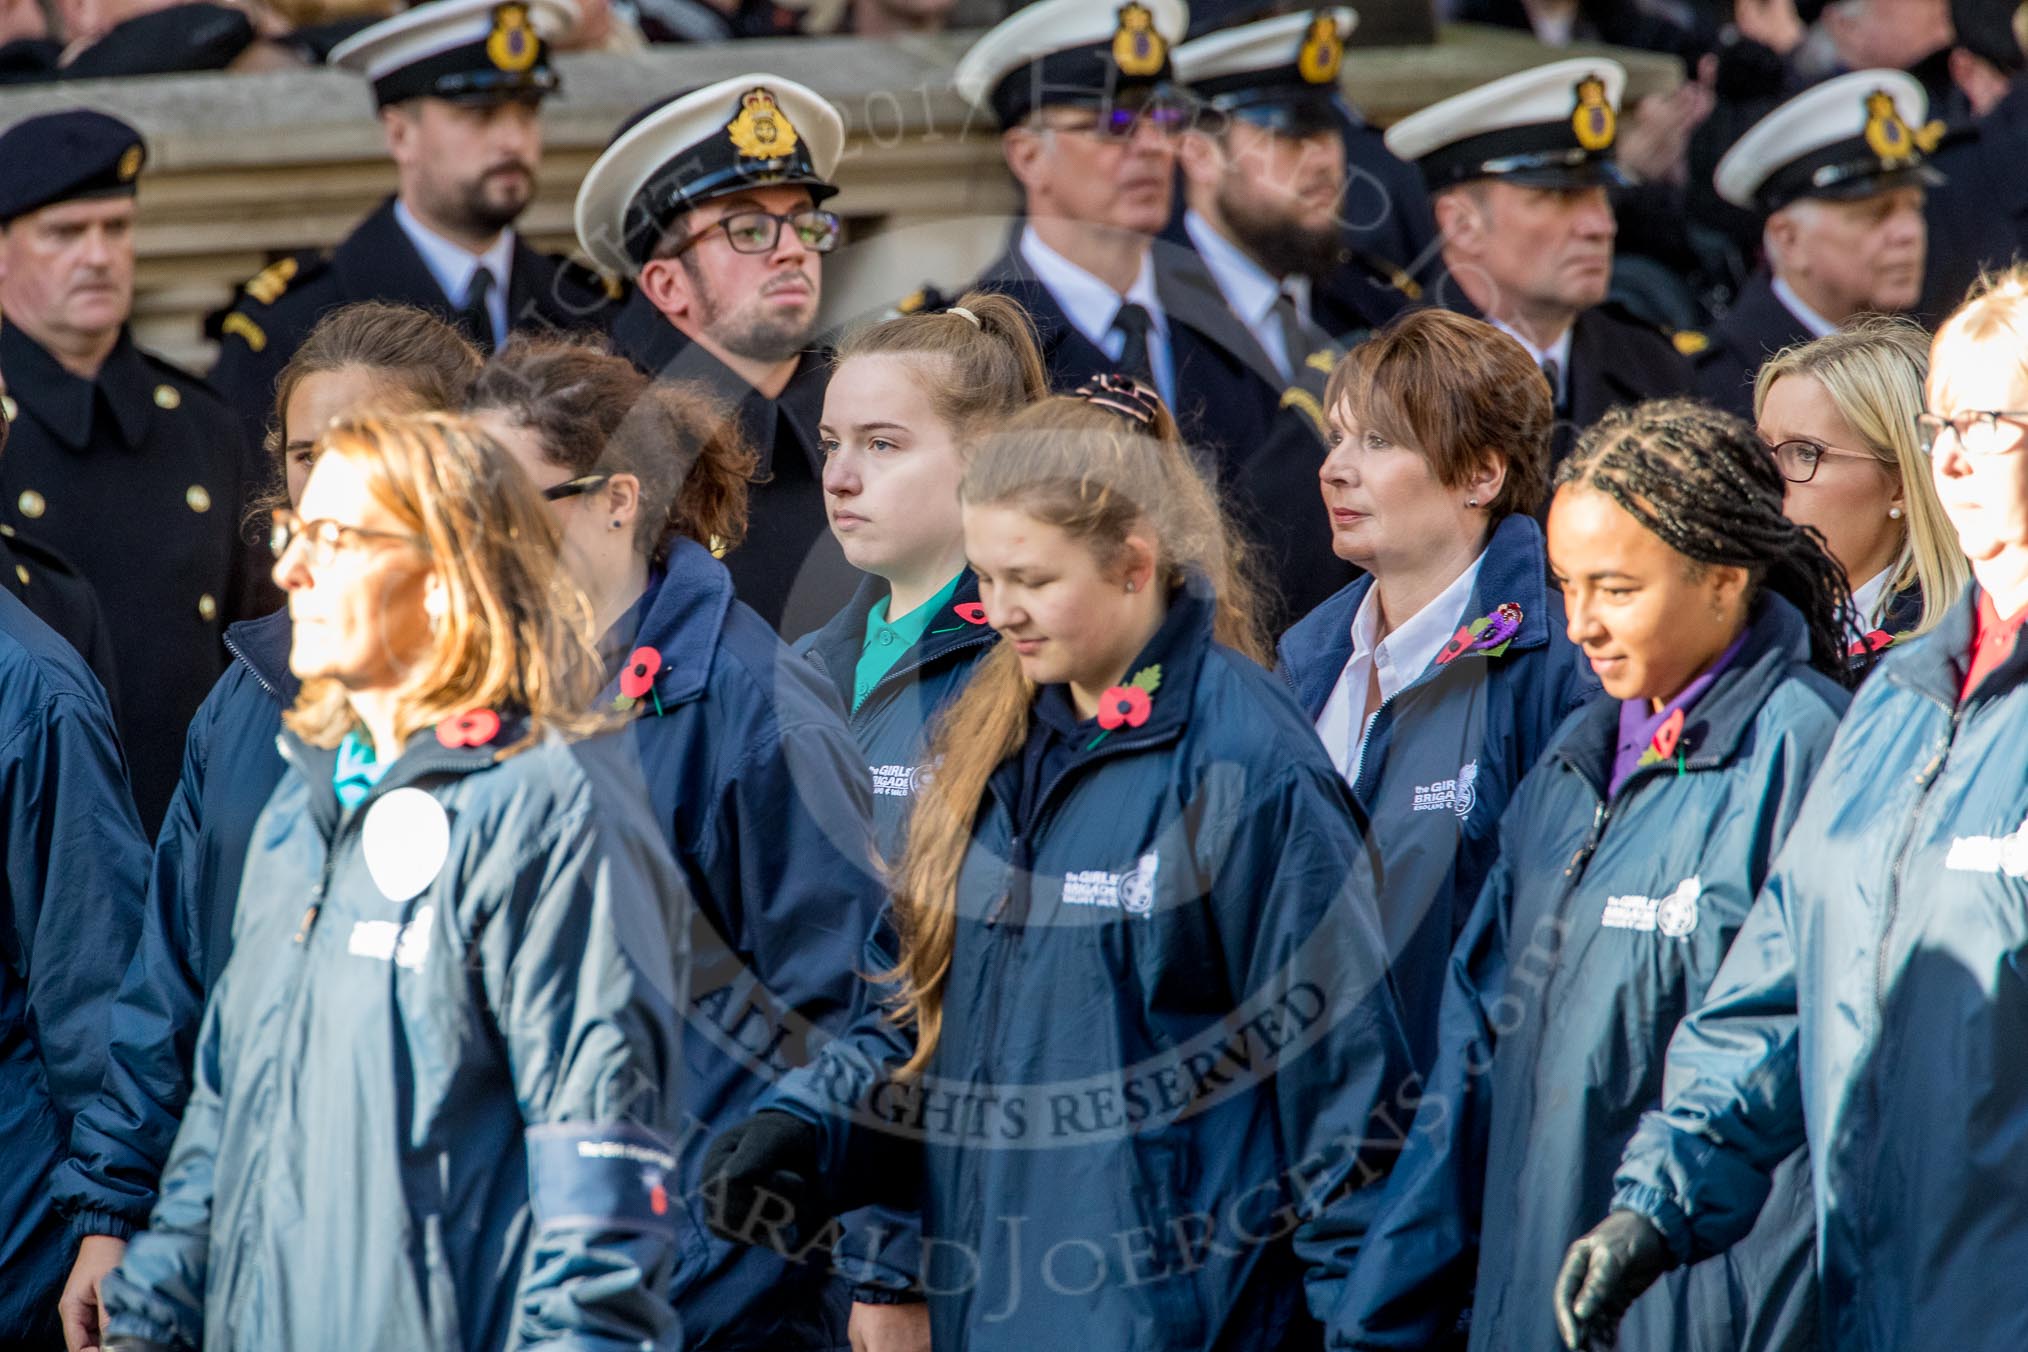 The Girls' Brigade England & Wales (Group M40, 16 members) during the Royal British Legion March Past on Remembrance Sunday at the Cenotaph, Whitehall, Westminster, London, 11 November 2018, 12:30.